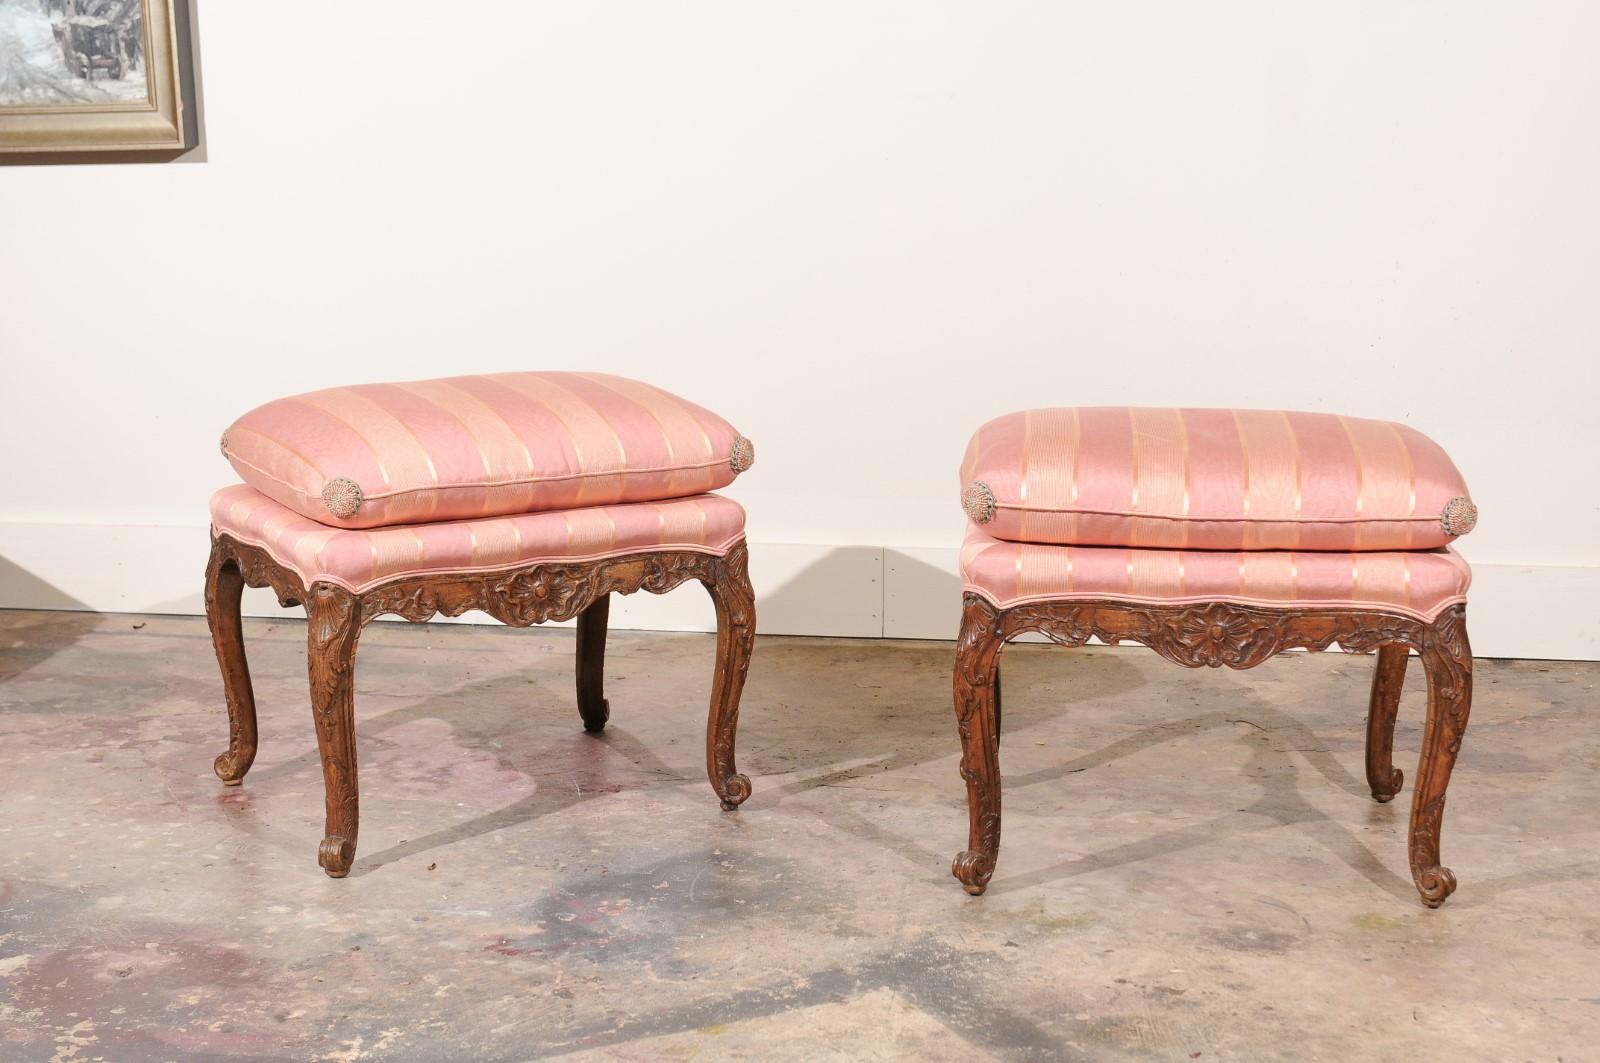 This stunning pair of Louis XV stools stands on four beautifully carved cabriole legs and scalloped apron. The seat is upholstered in a stripe fabric in two shades of salmon /coral topped with a cushion in the same fabric. A rosette on the four